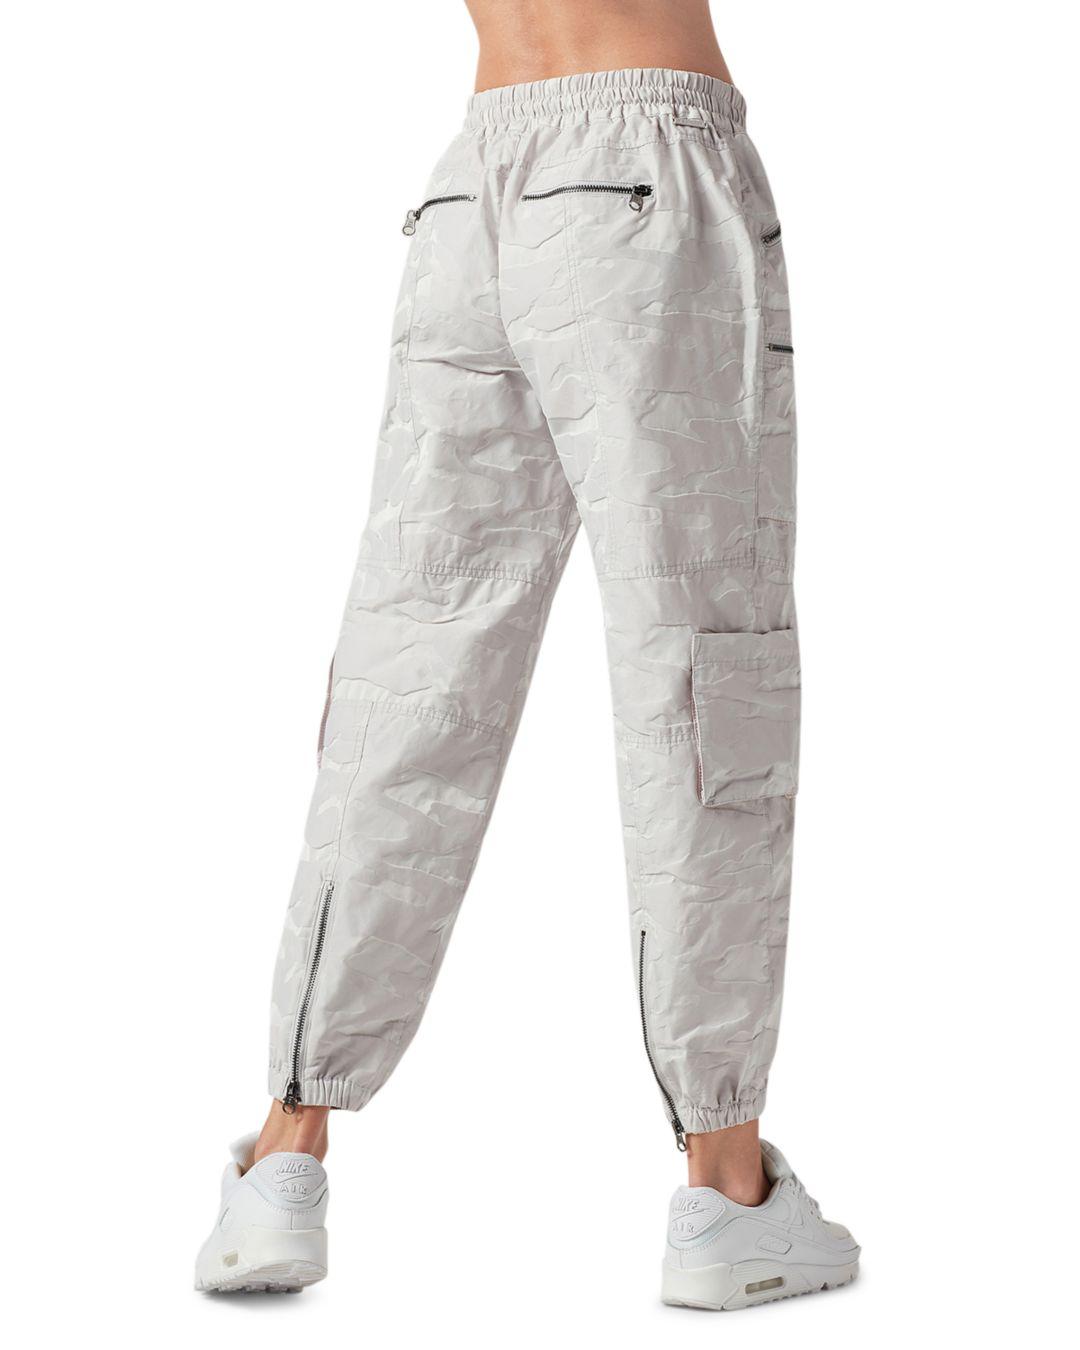 BLANC NOIR Synthetic Airborne Camo Cargo Pants in Gray - Lyst